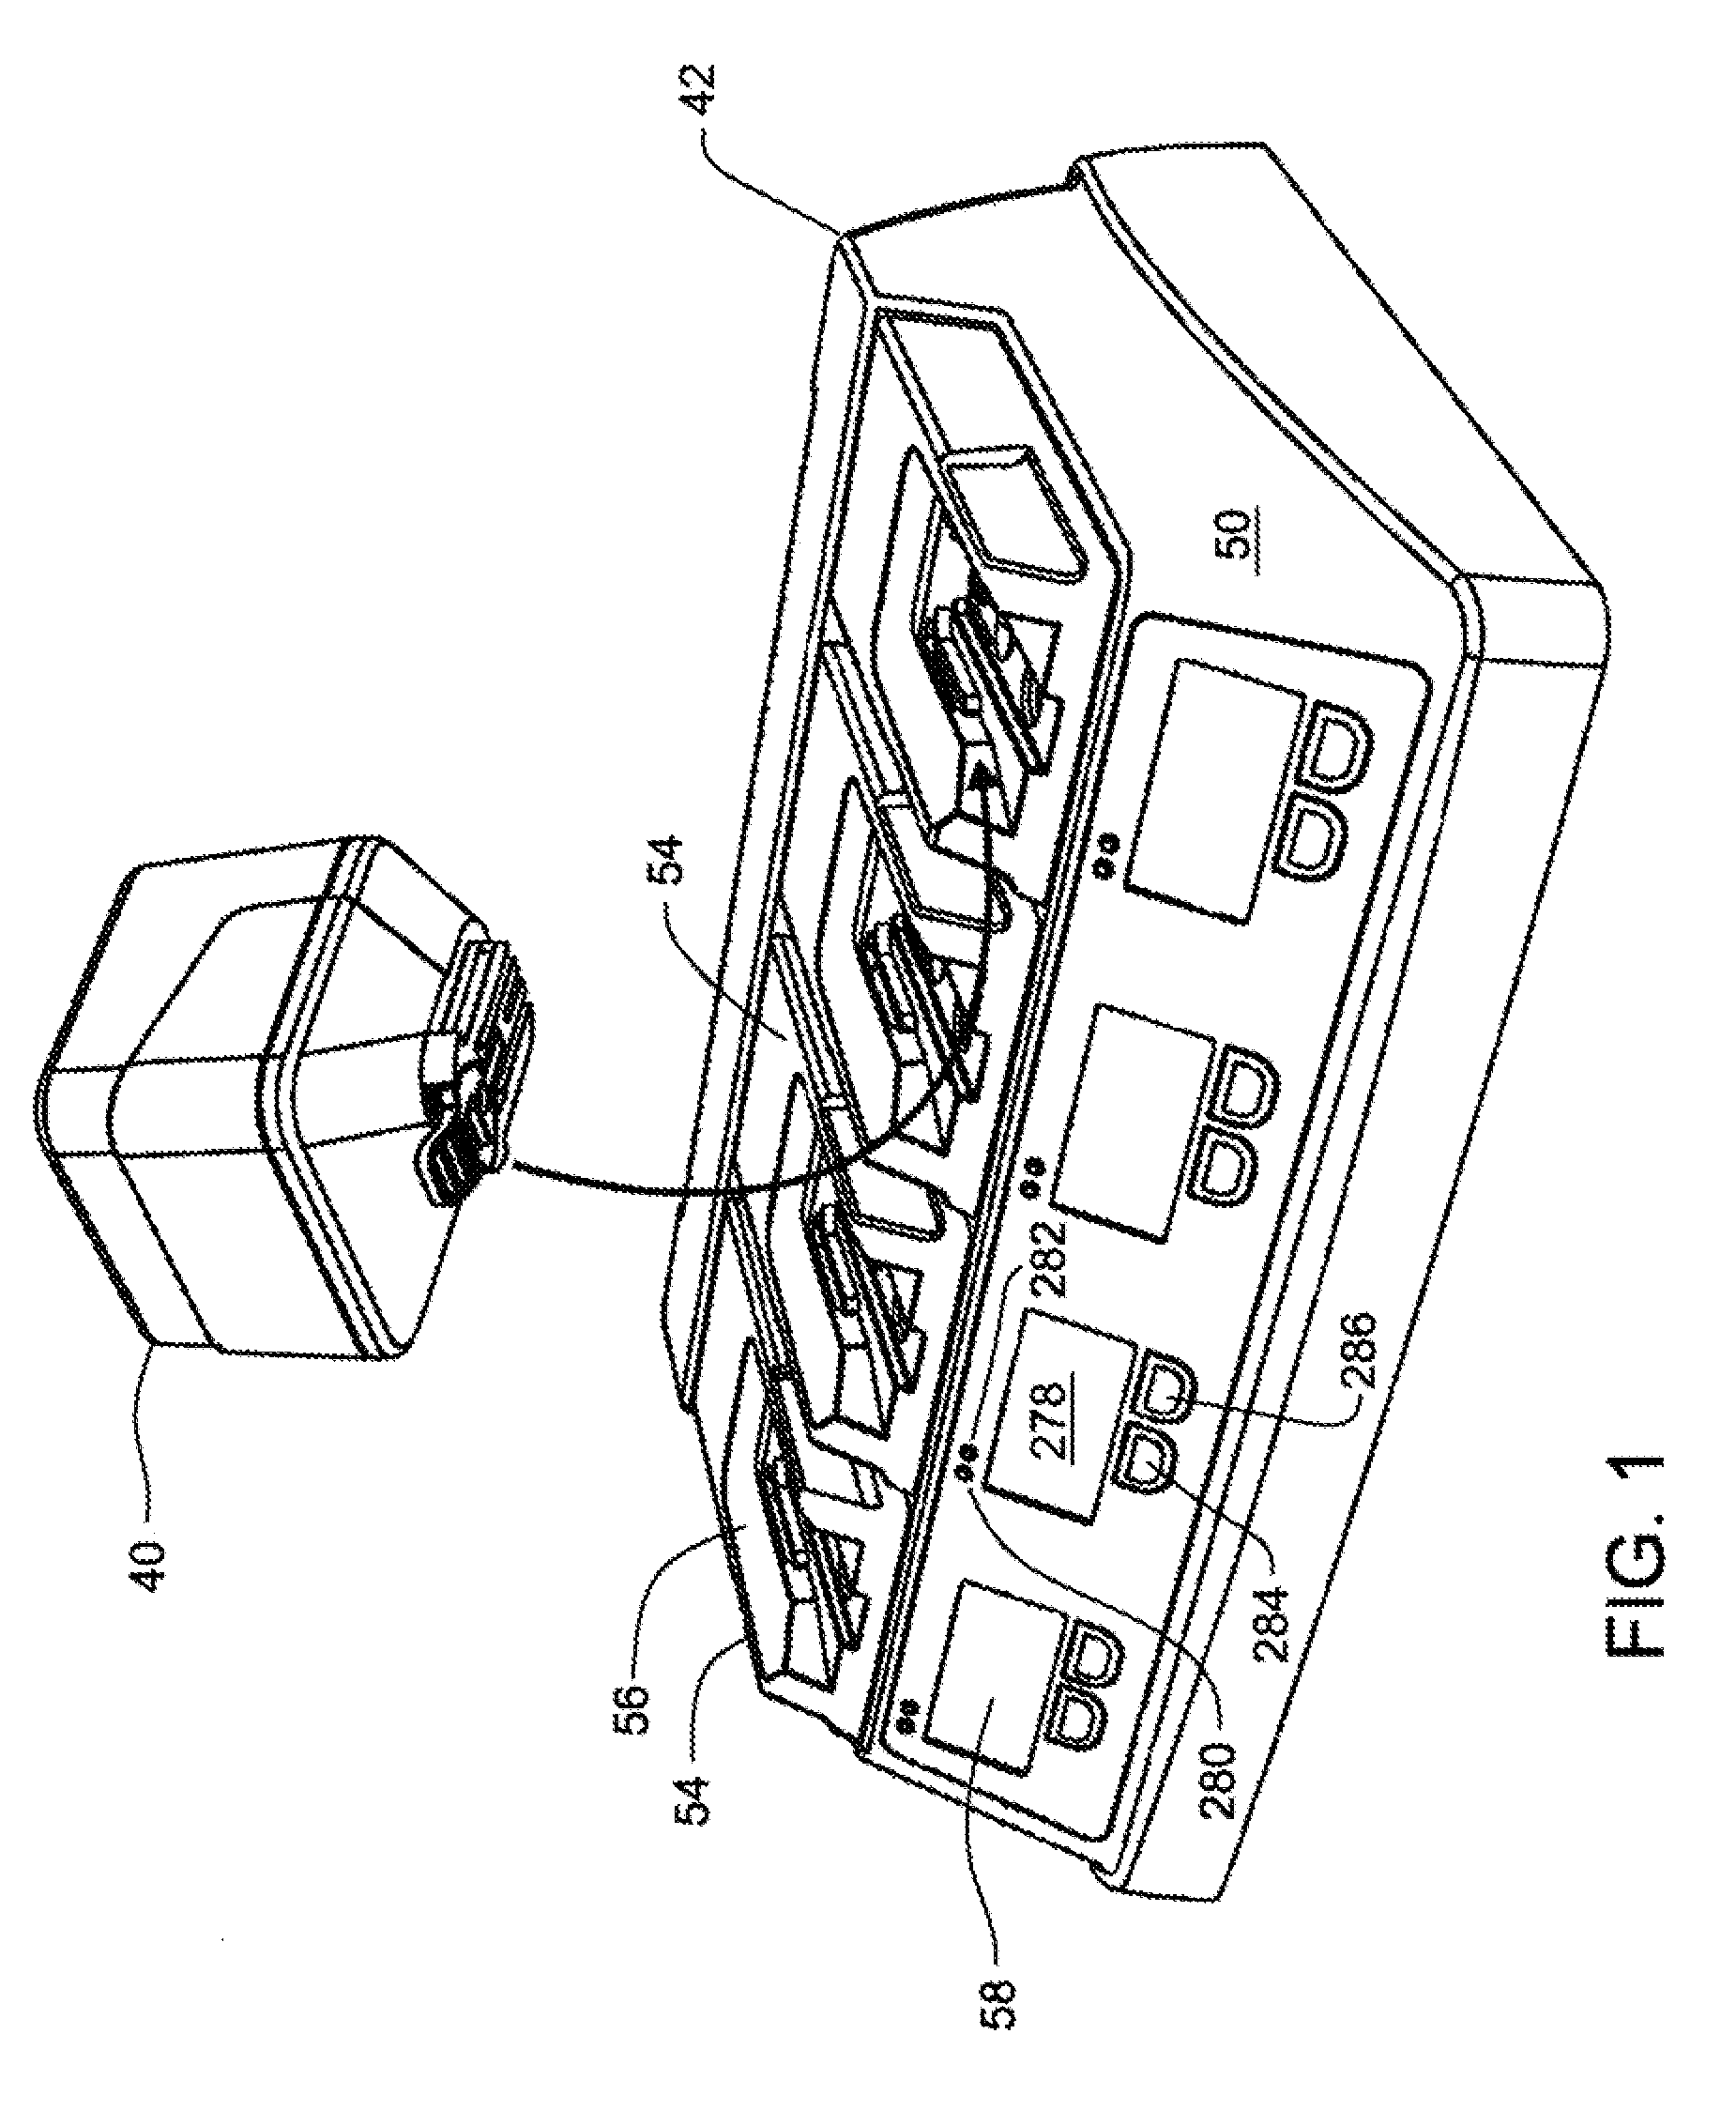 System and method for recharging a battery exposed to a harsh environment